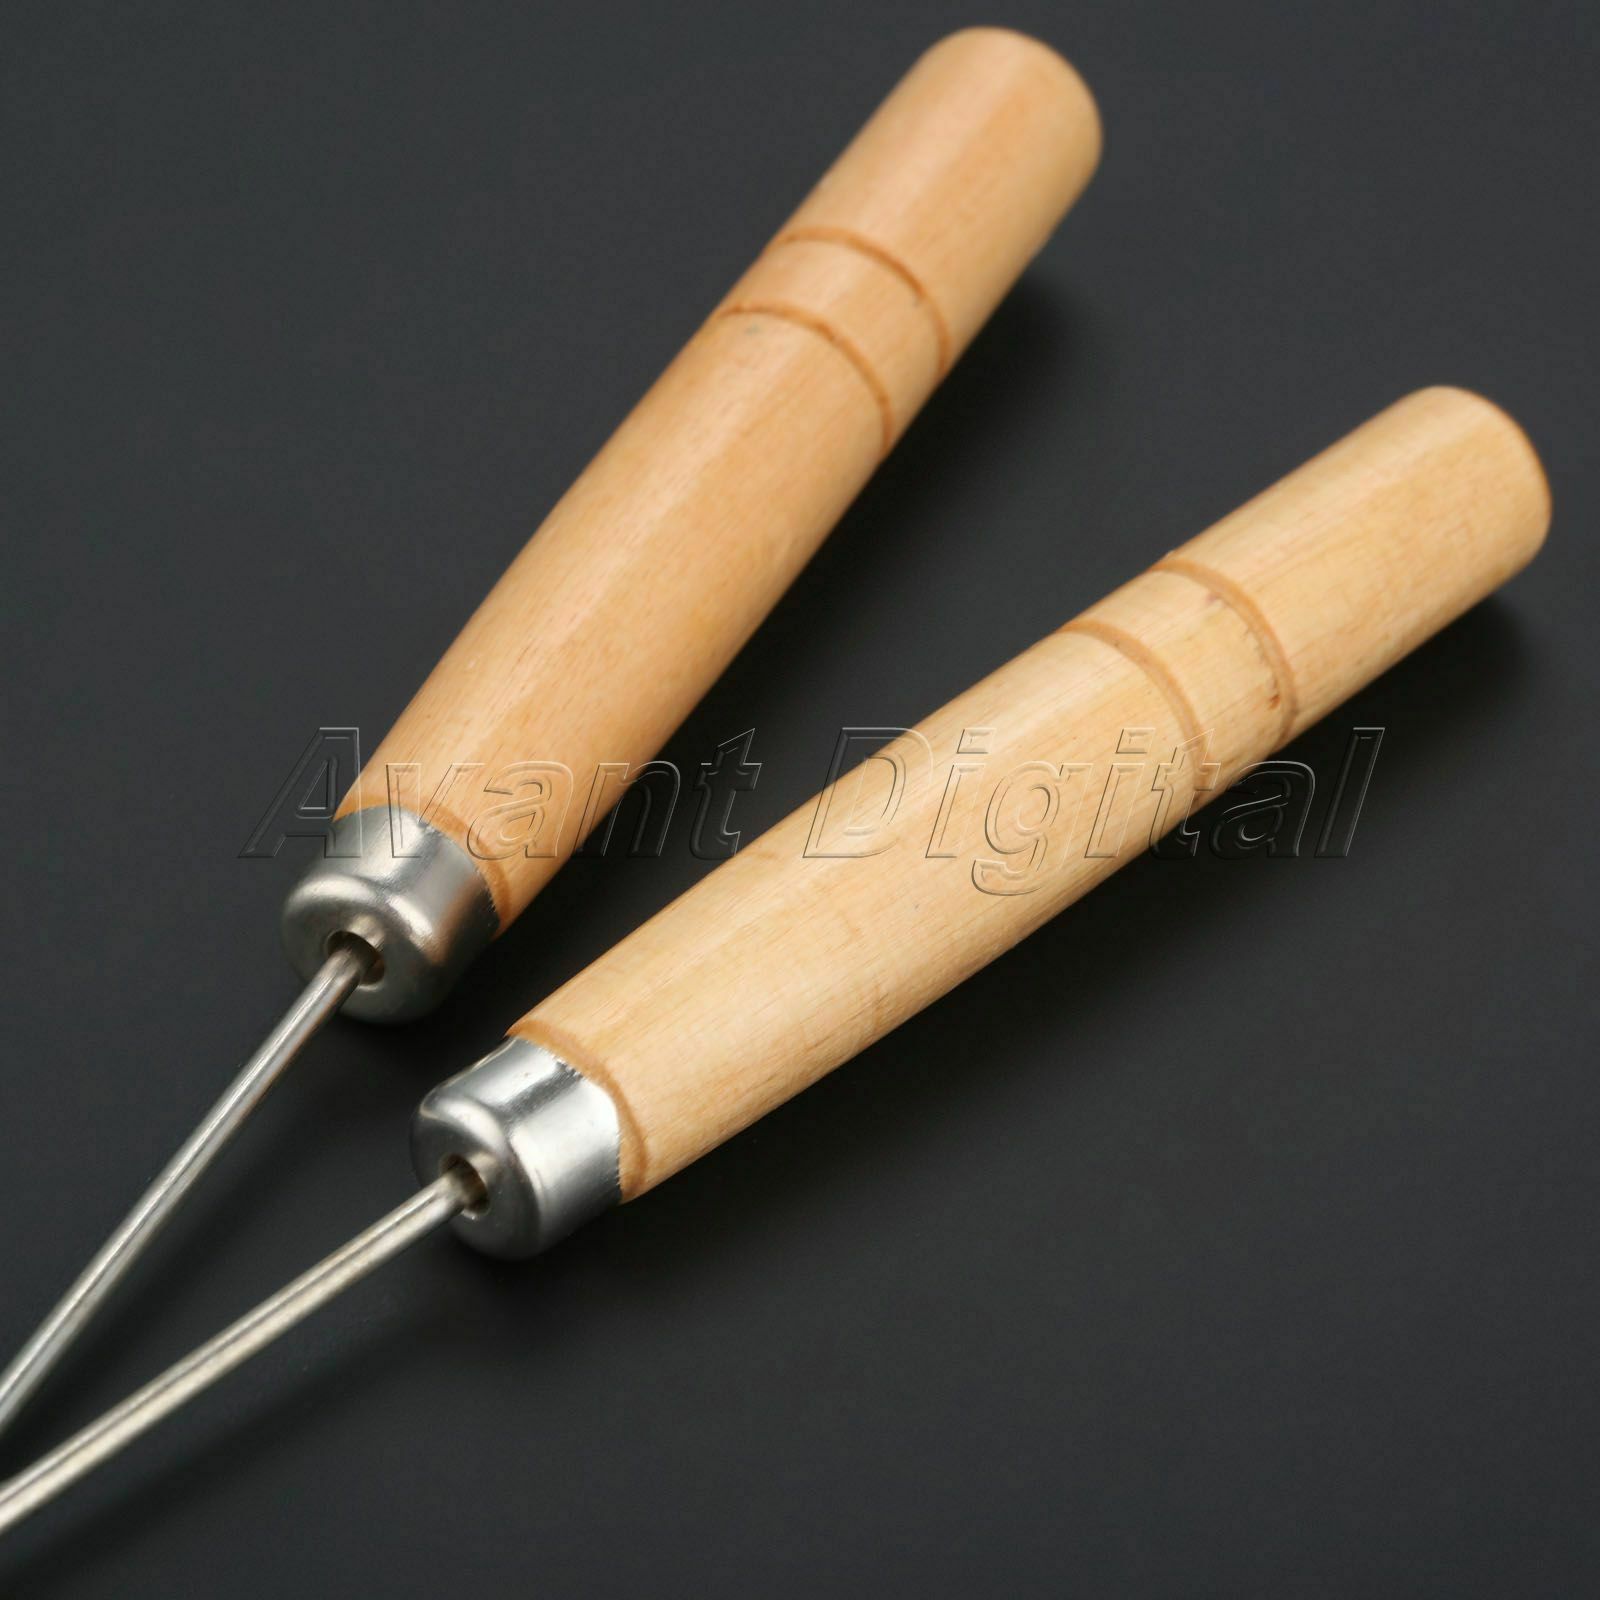 140mm Wooden Handle Sewing Awls Leather Punch Repair Stitching Clicker Tool 5Pcs